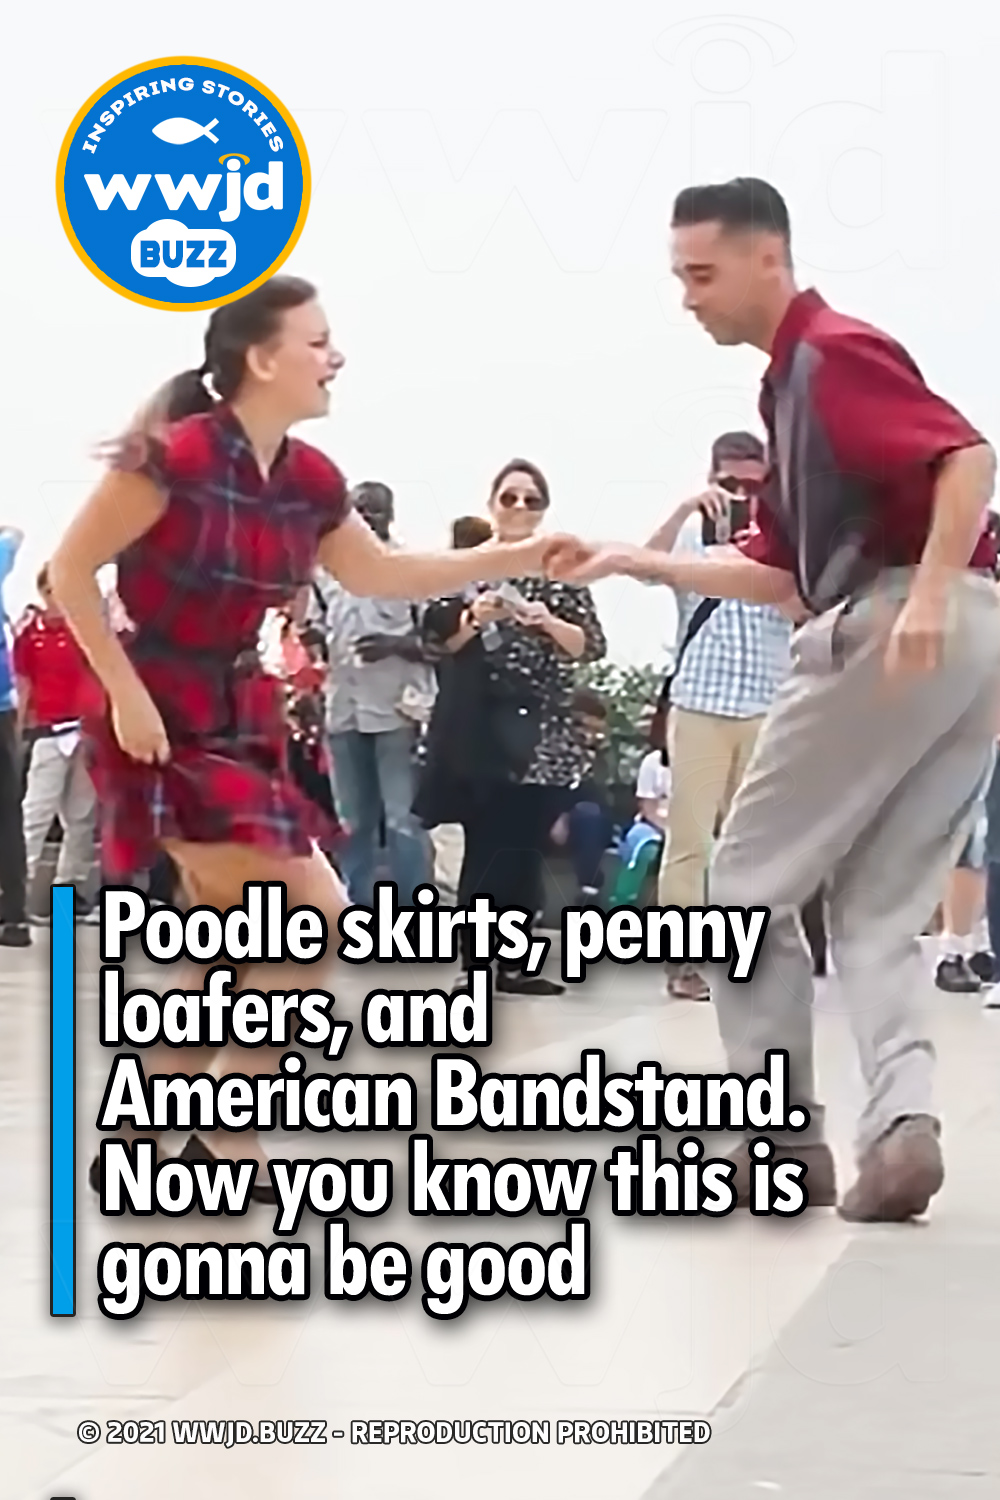 Poodle skirts, penny loafers, and American Bandstand. Now you know this is gonna be good